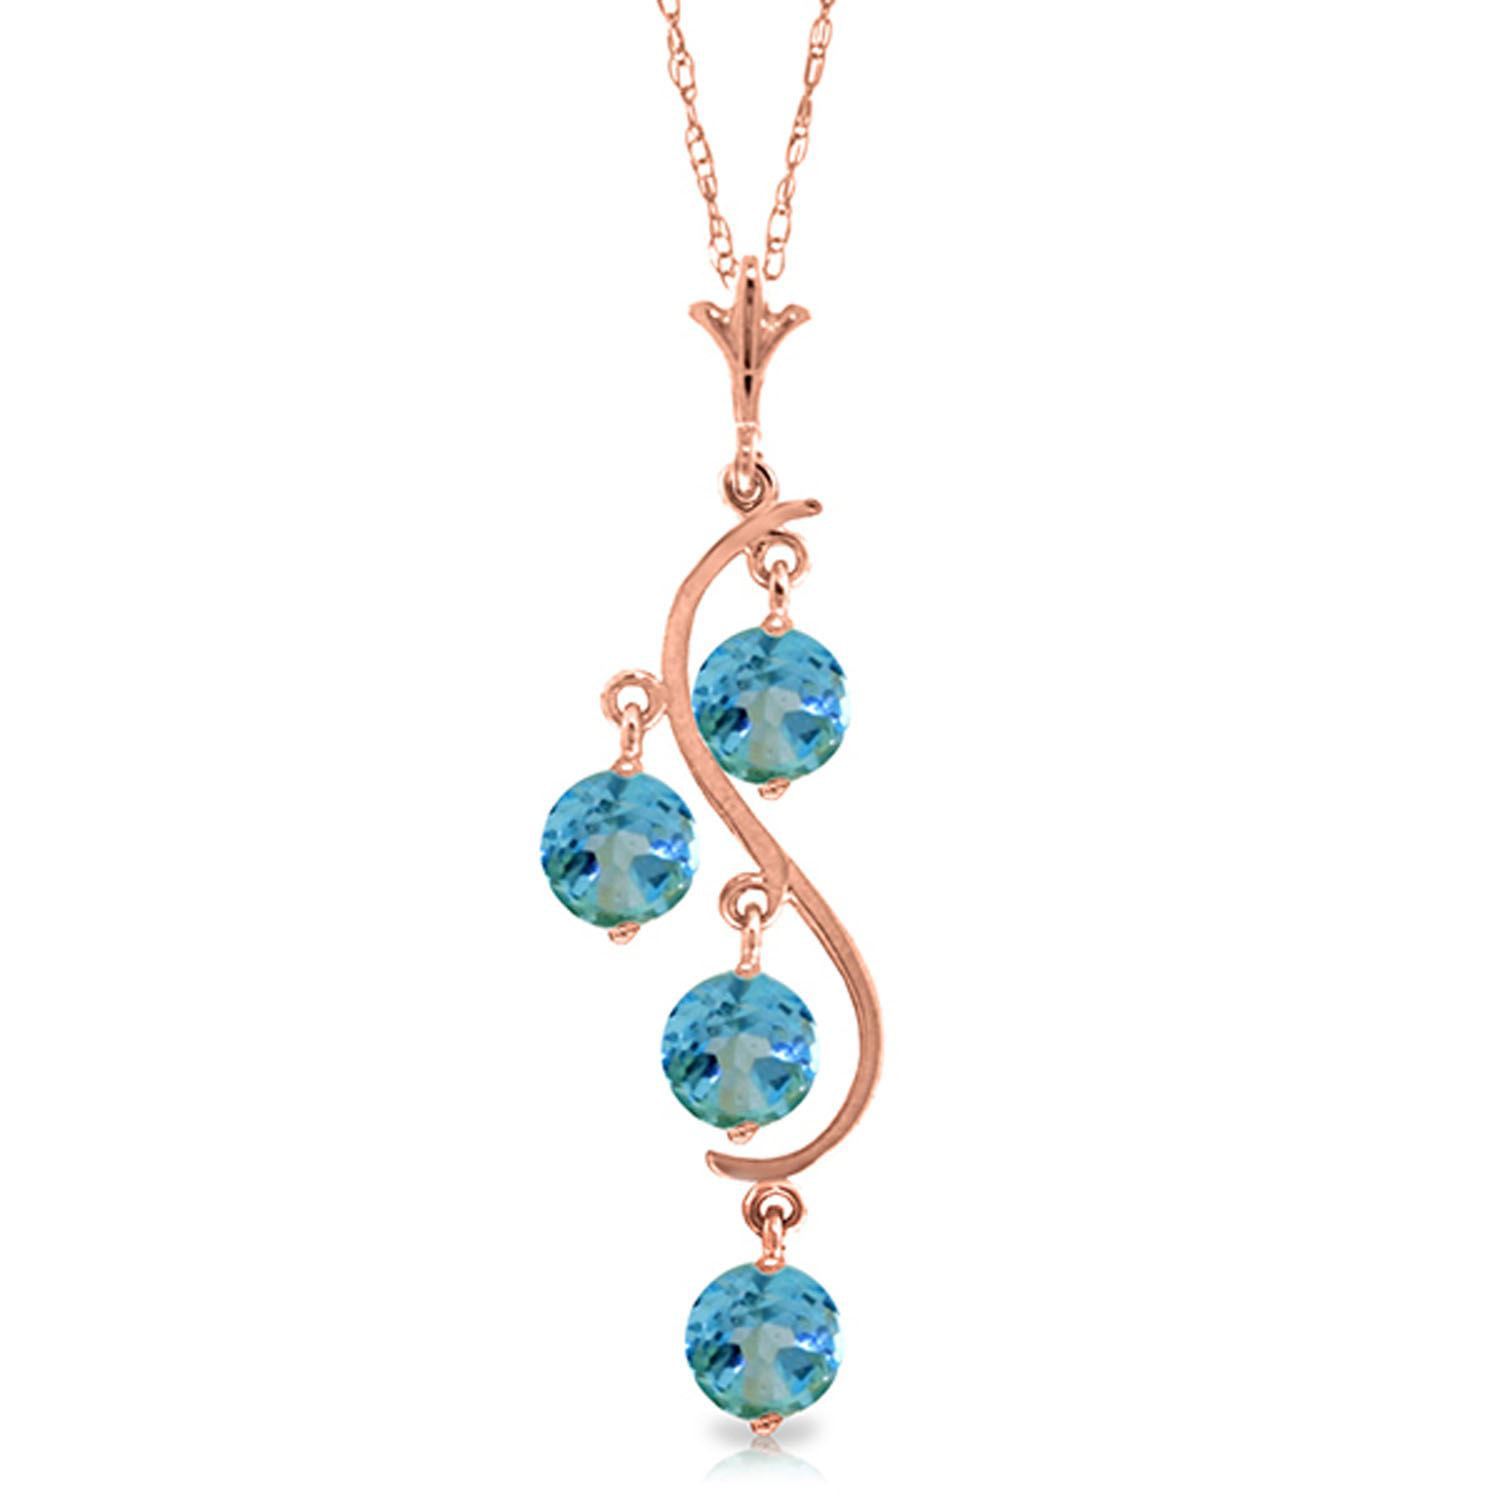 ALARRI 14K Solid Gold Heart Necklace w/ Natural Blue Topaz with 18 Inch Chain Length